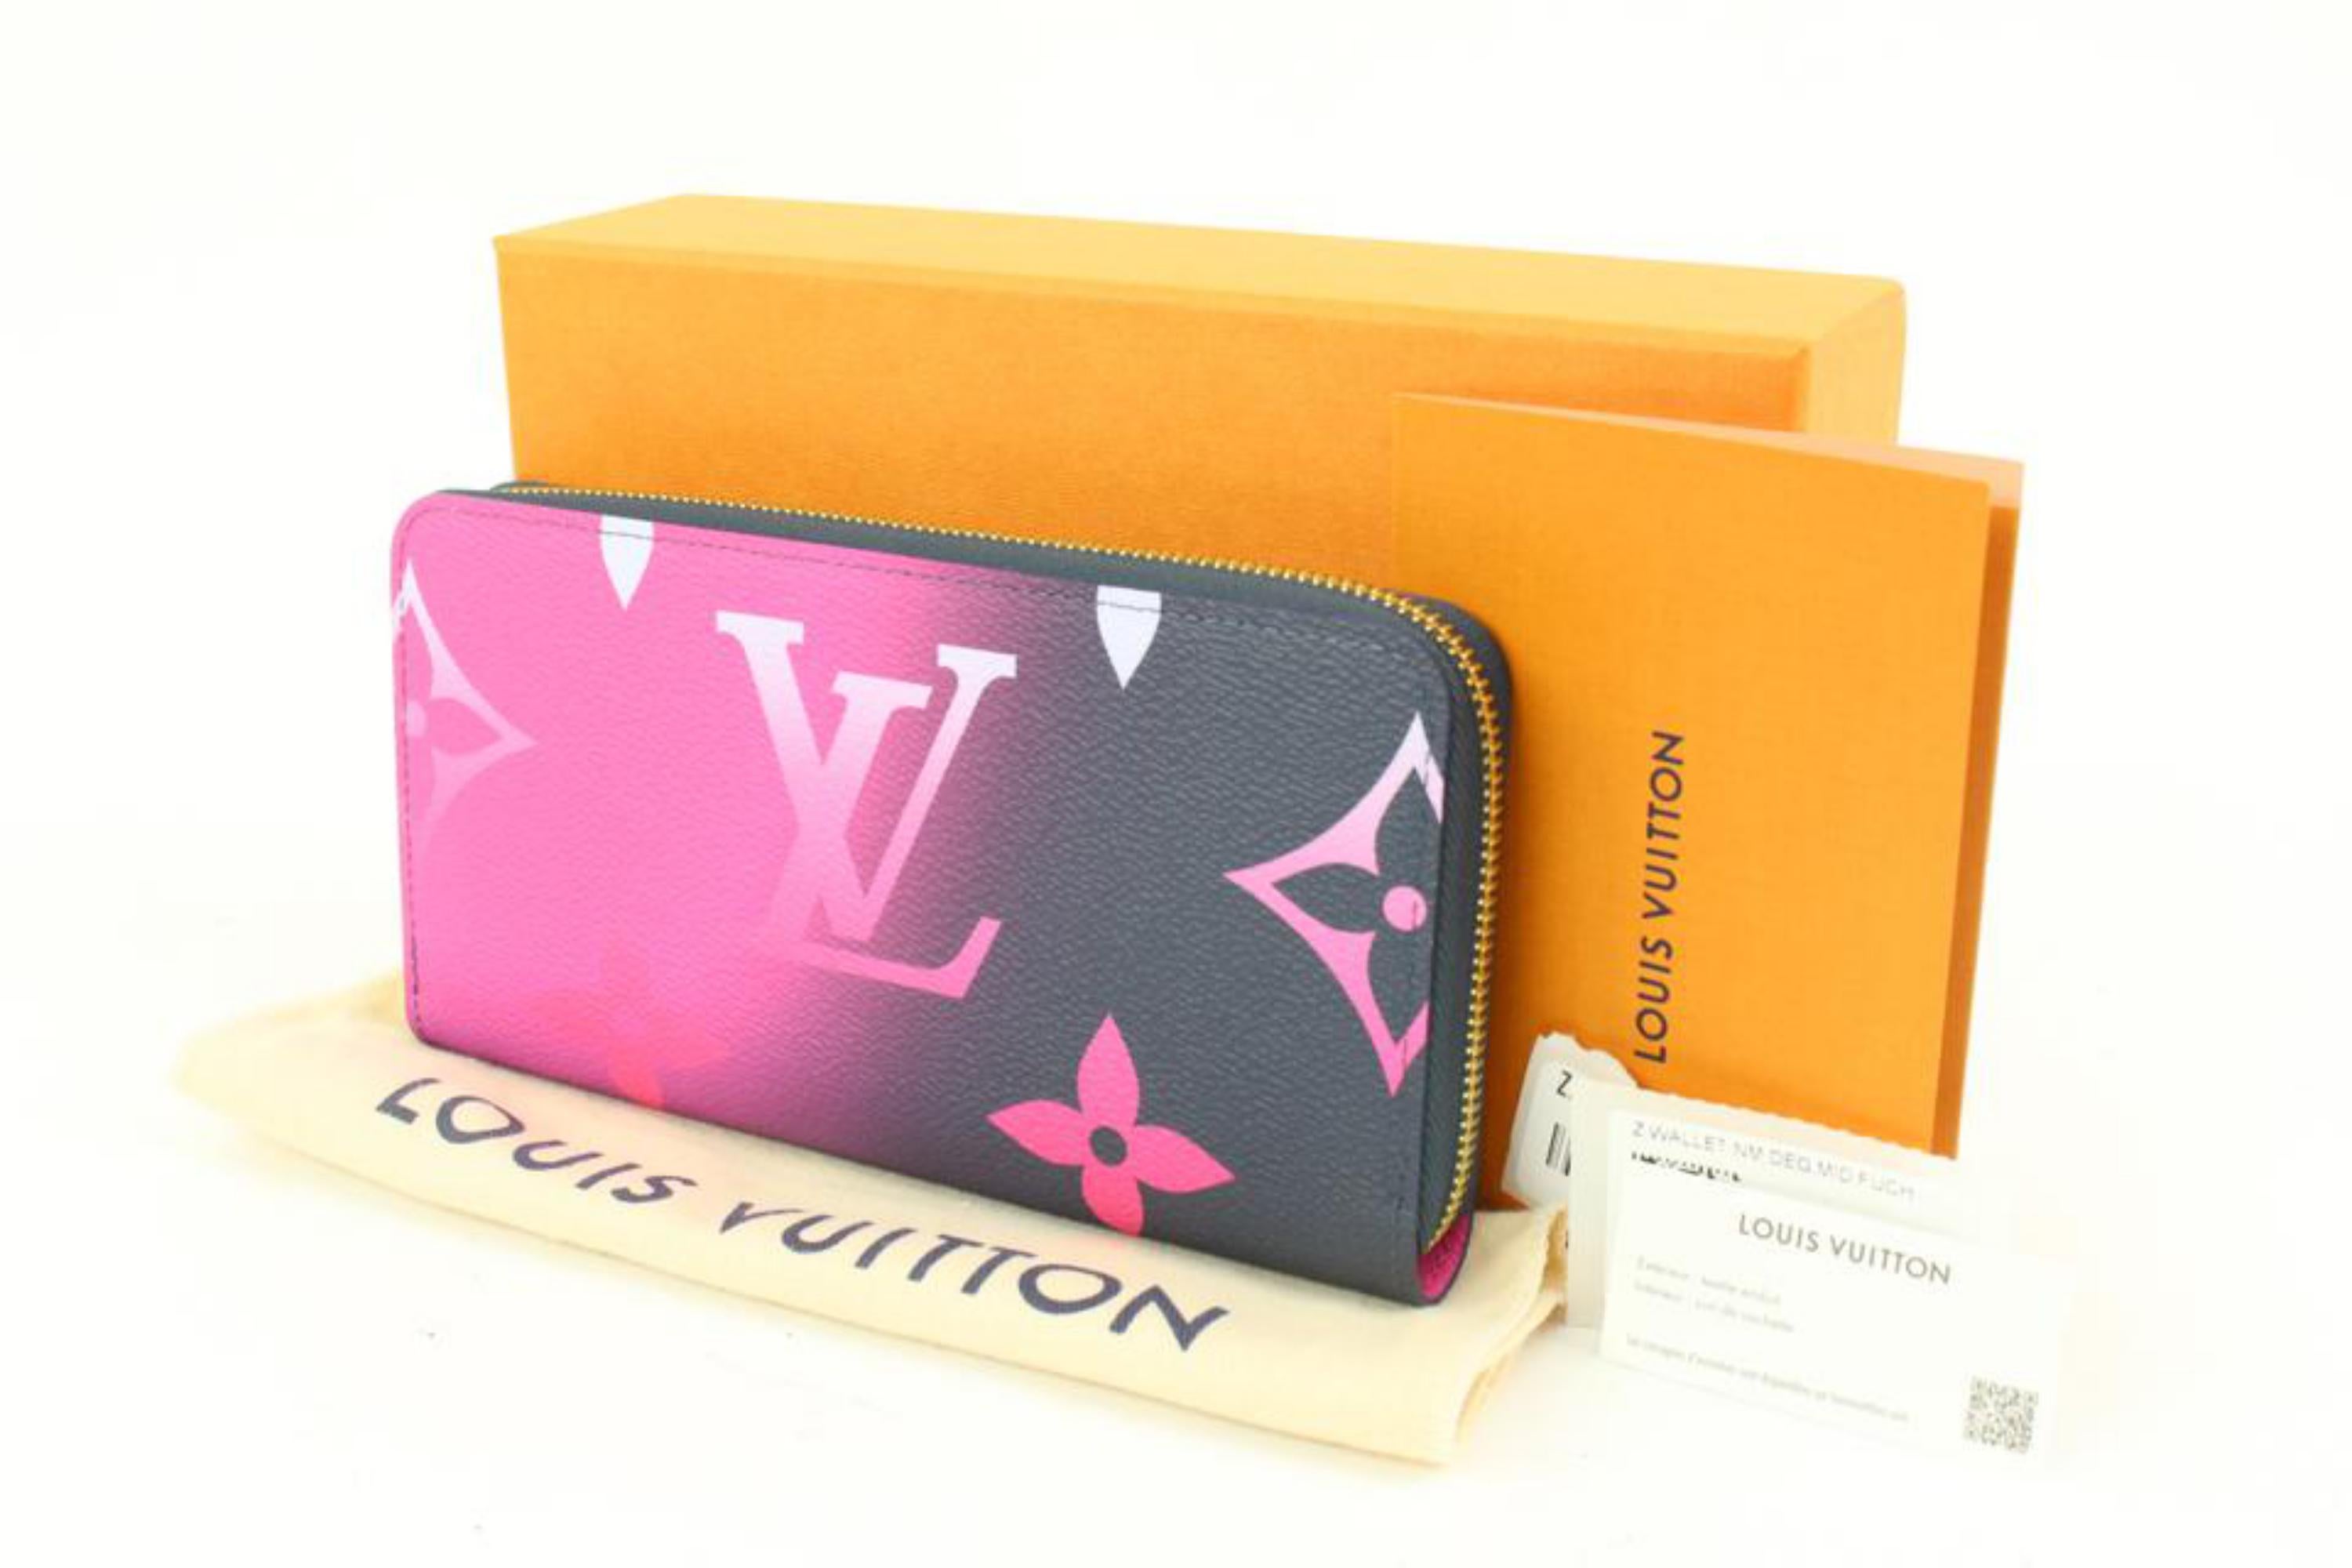 Louis Vuitton Midnight Fuchsia x Multicolor Long Zip Around Wallet Zippy 19lz420s
Date Code/Serial Number: RFID Chip
Made In: Spain
Measurements: Length:  7.6